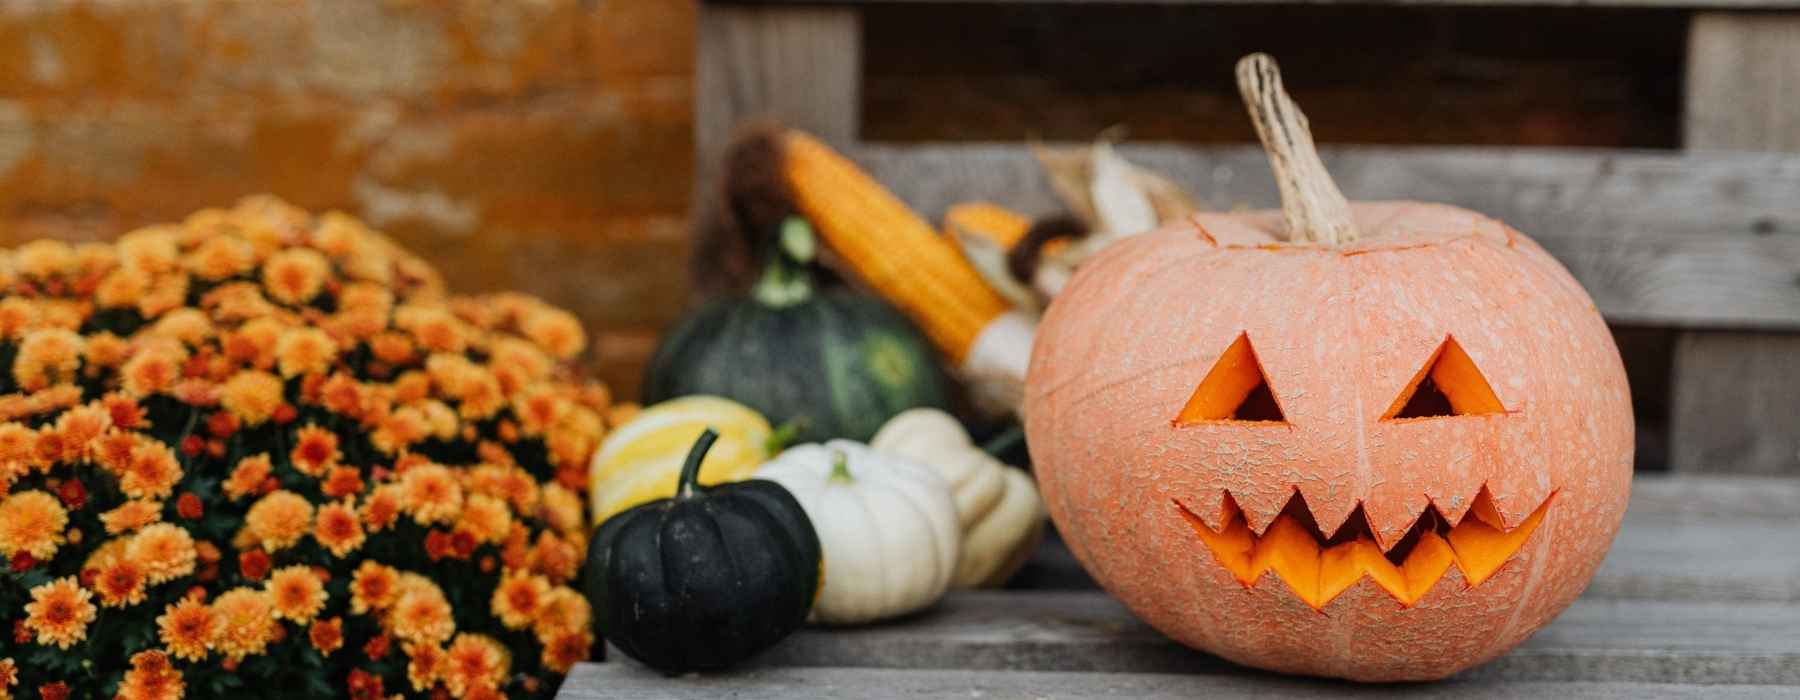 Healthy, Kid-friendly Recipes to Combat the Halloween Candy Overload